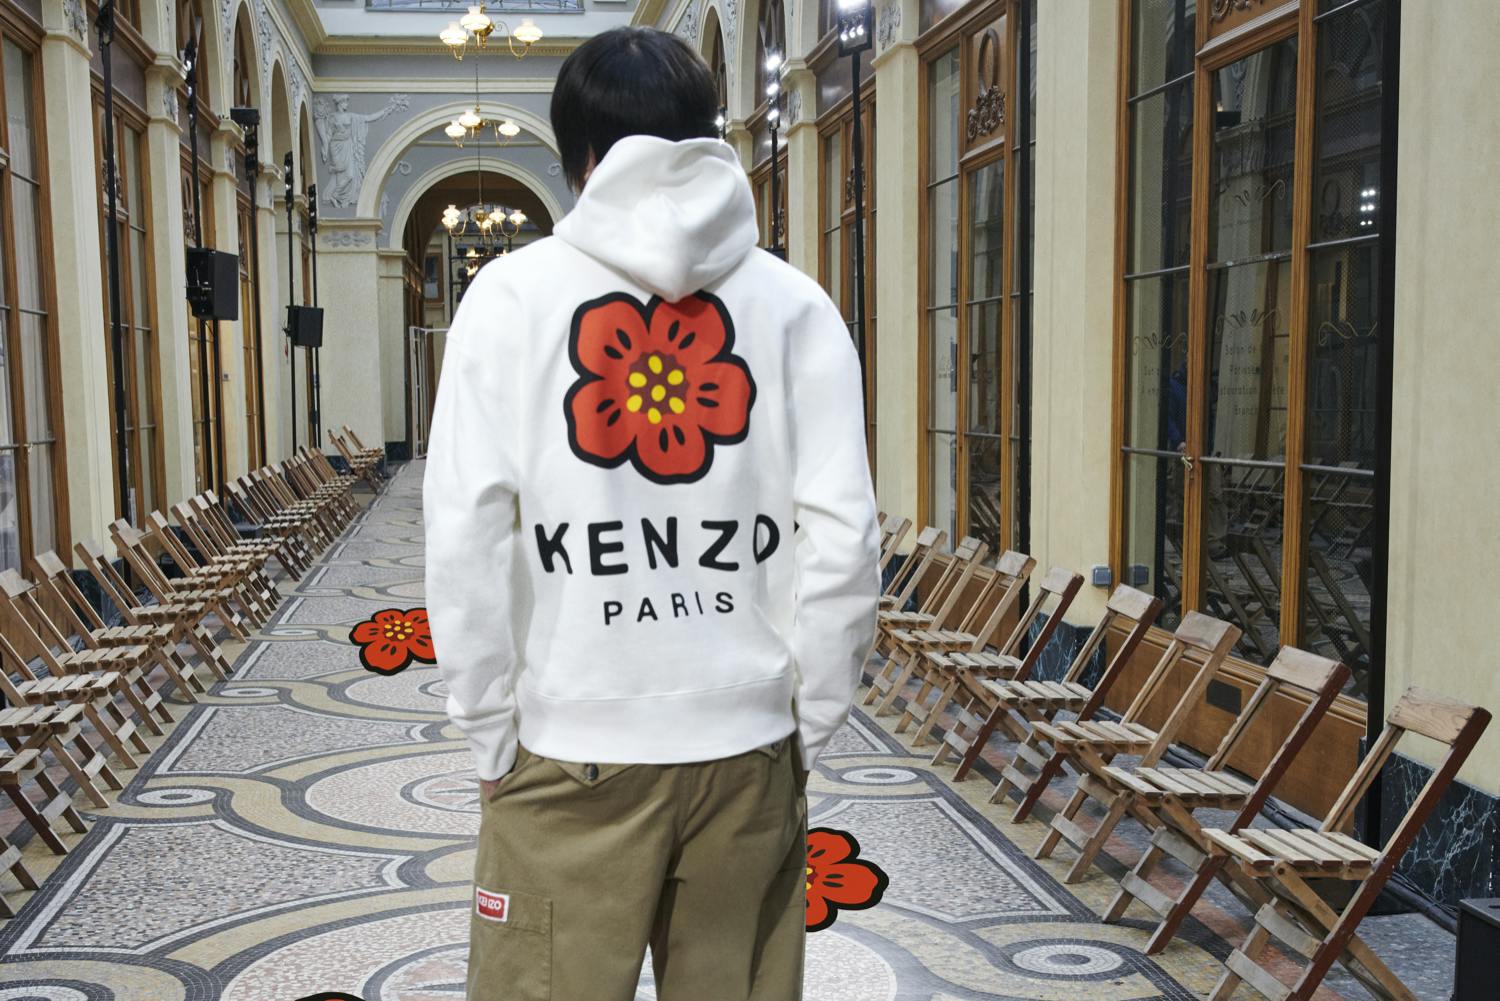 THE KENZO PARIS “BOKE FLOWER” COLLECTION | END. (Global)